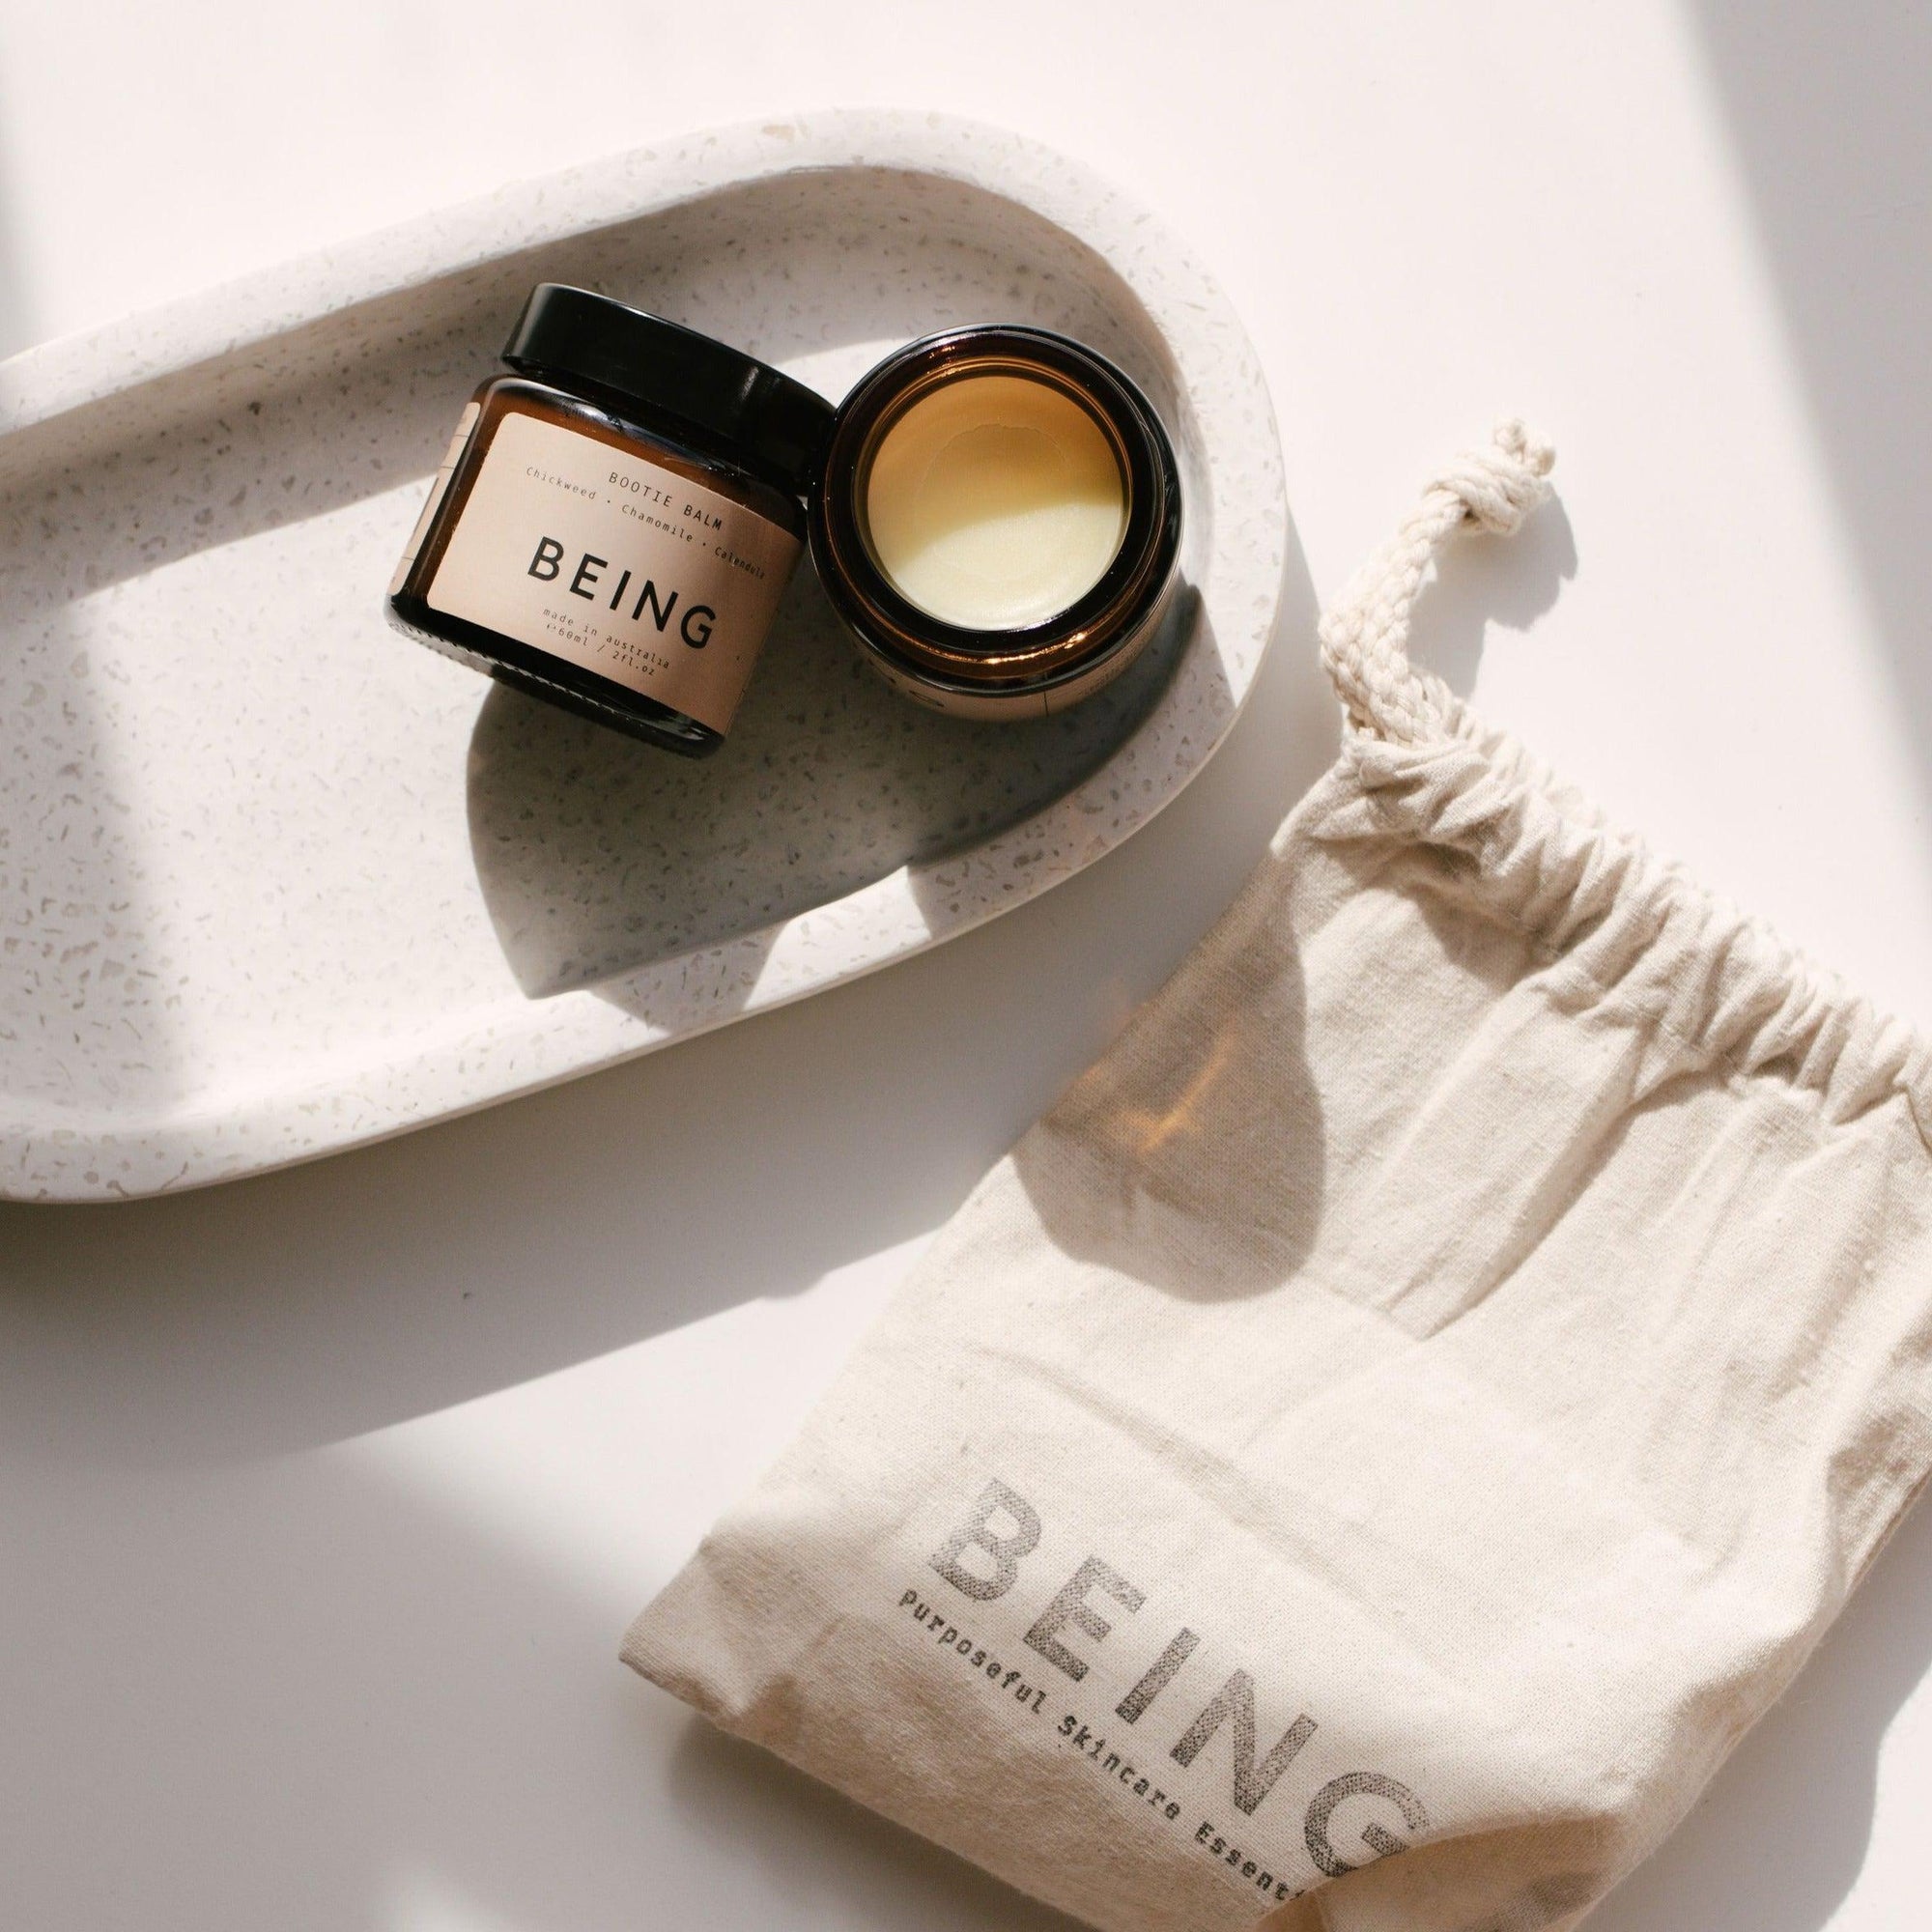 A small container with a  Being Skincare balm duo set and a bag on a white table.